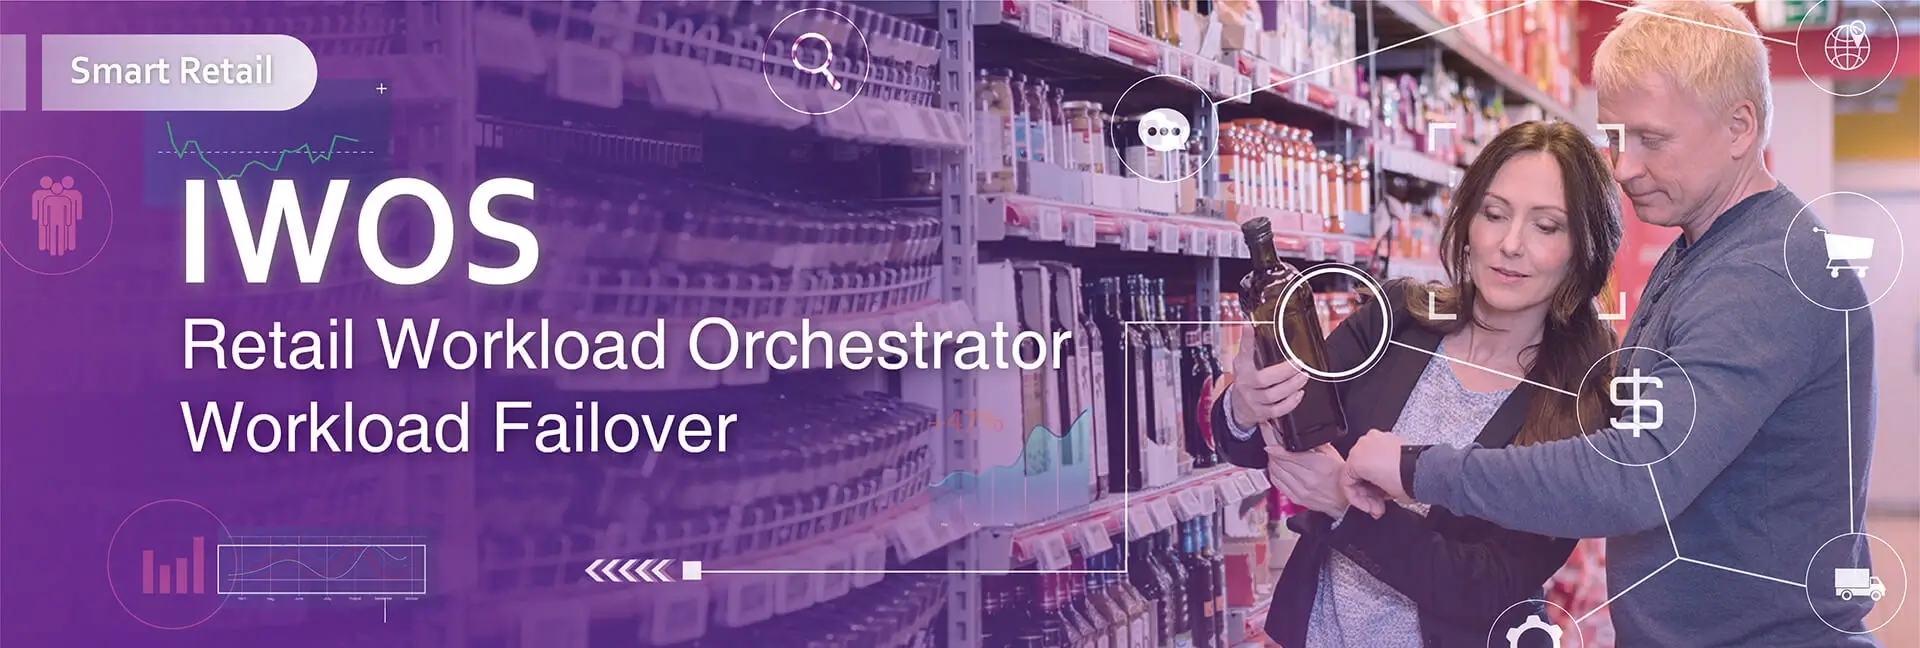 IWOS-Banner-Retail-Workload-Orchestrator-Workload-Failover